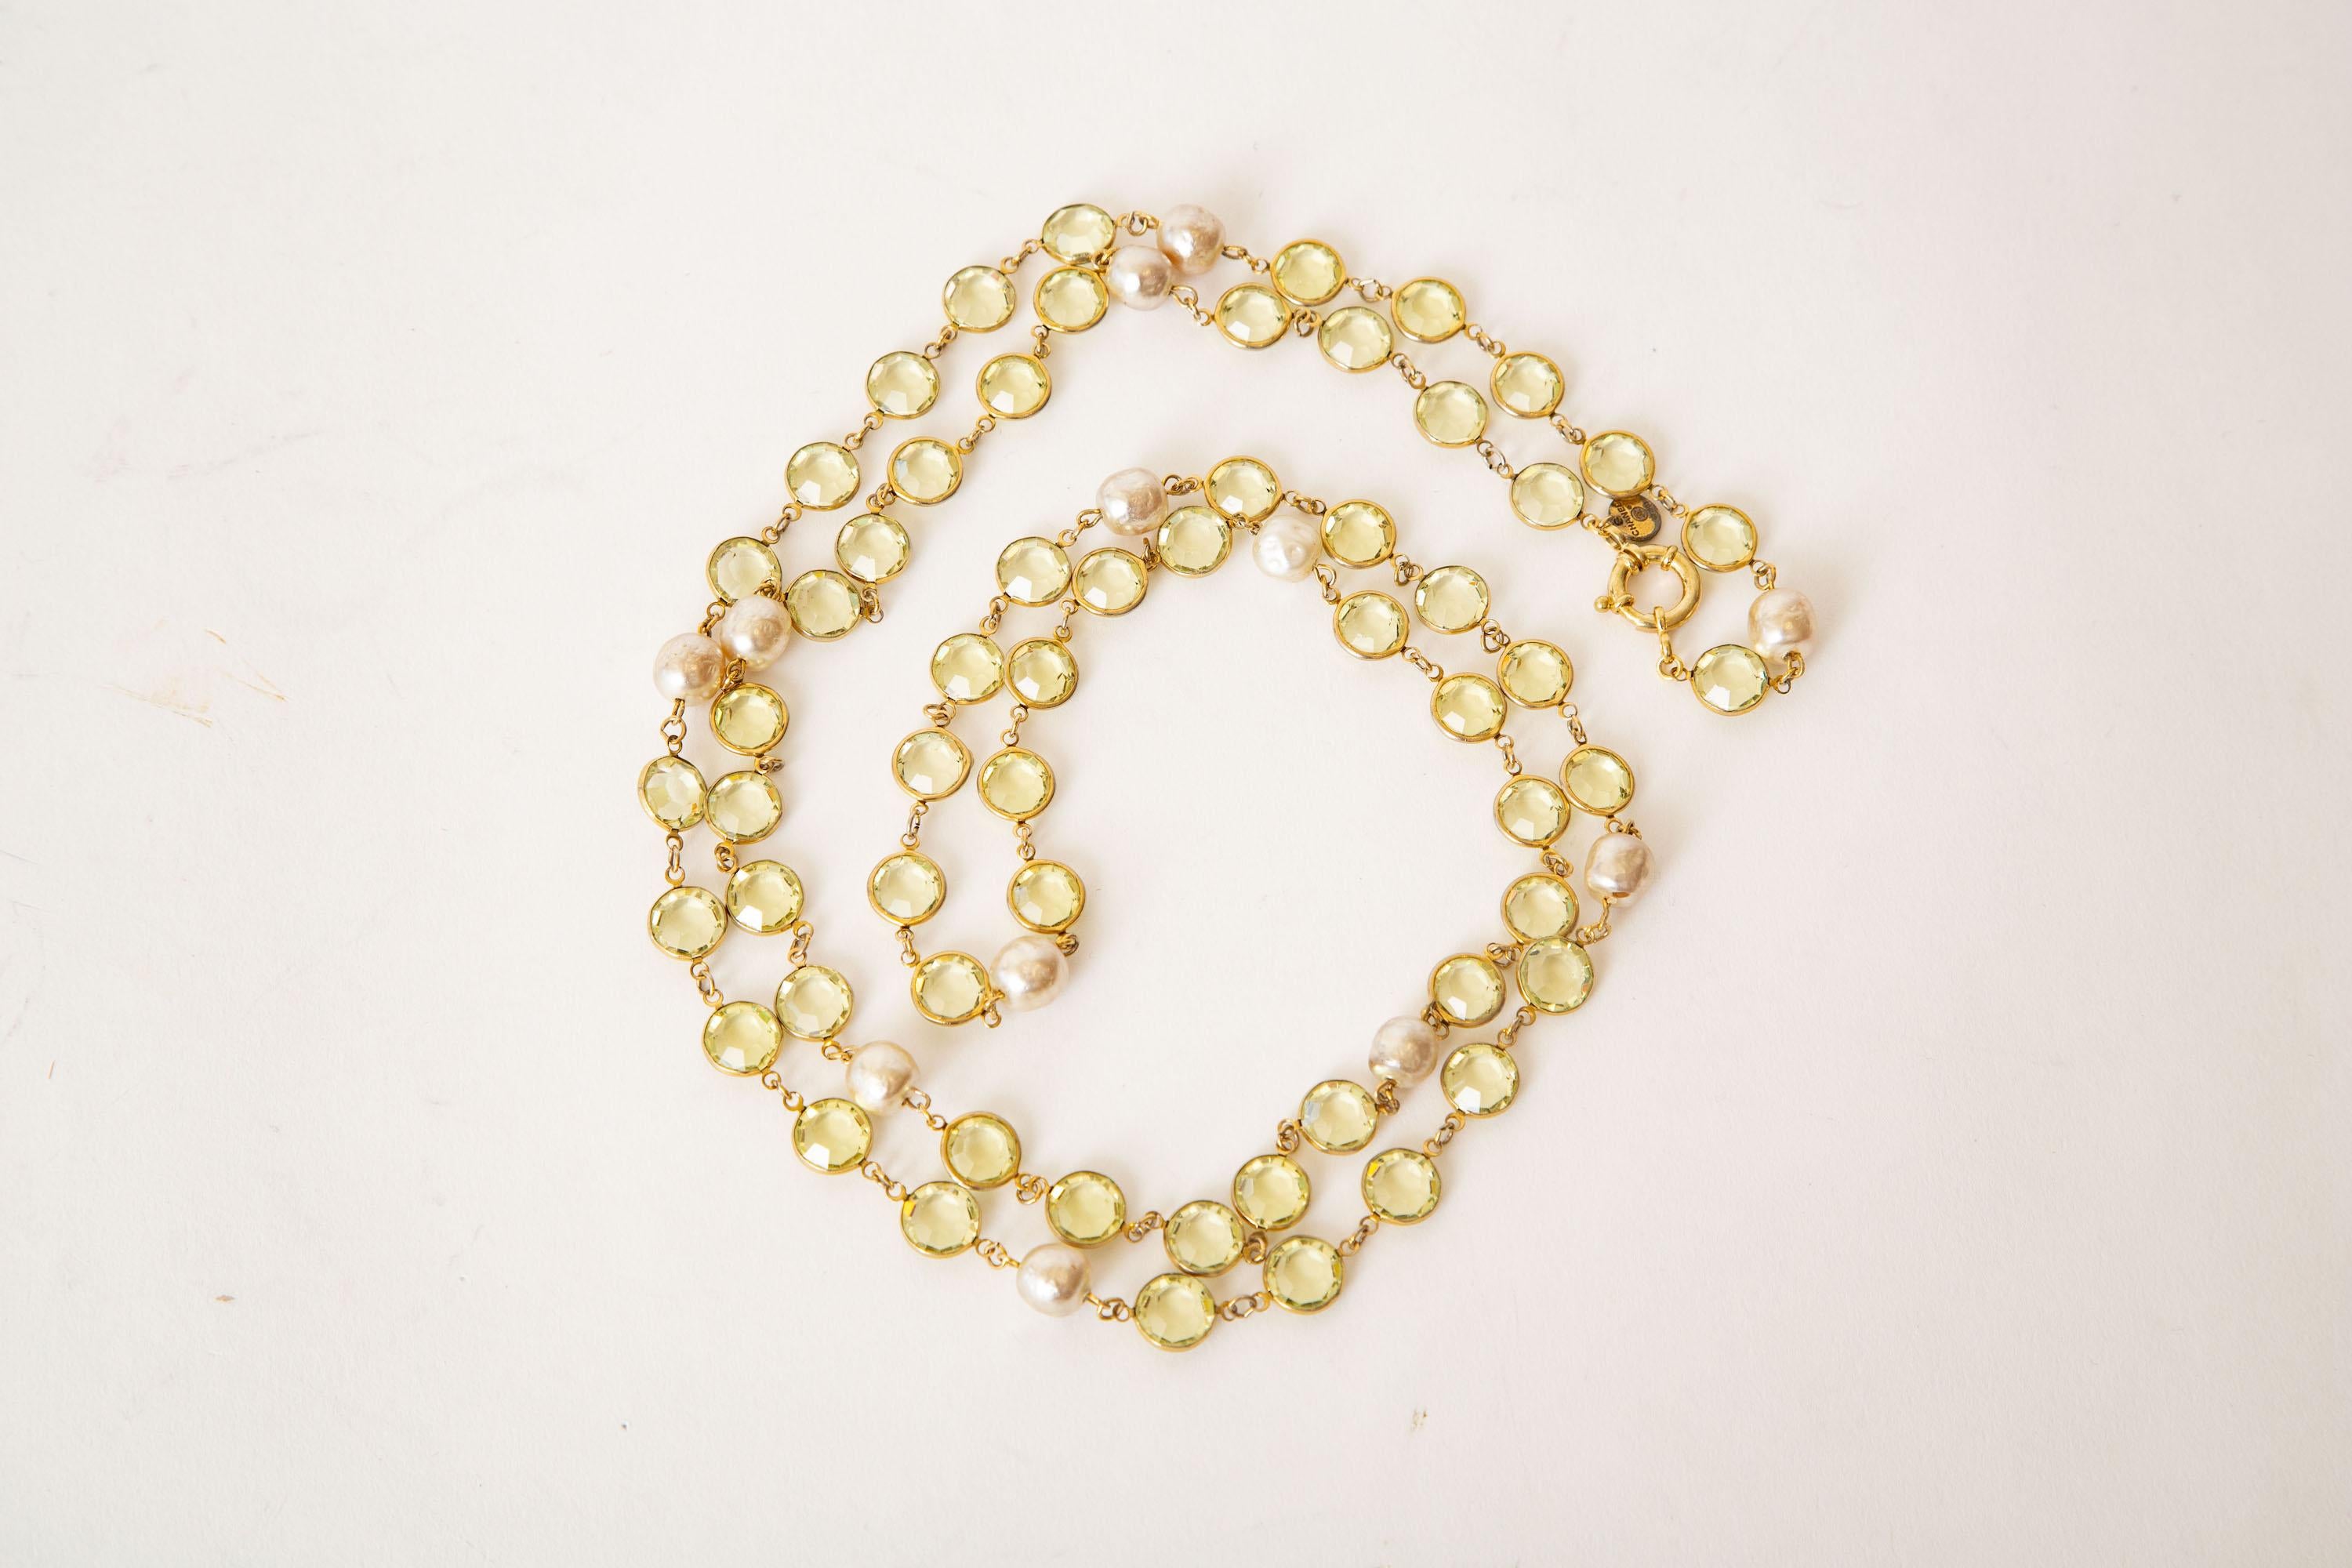 Vintage Chanel Chartreuse Beveled Crystals And Faux Pearl Sautoir Wrap Necklace 7